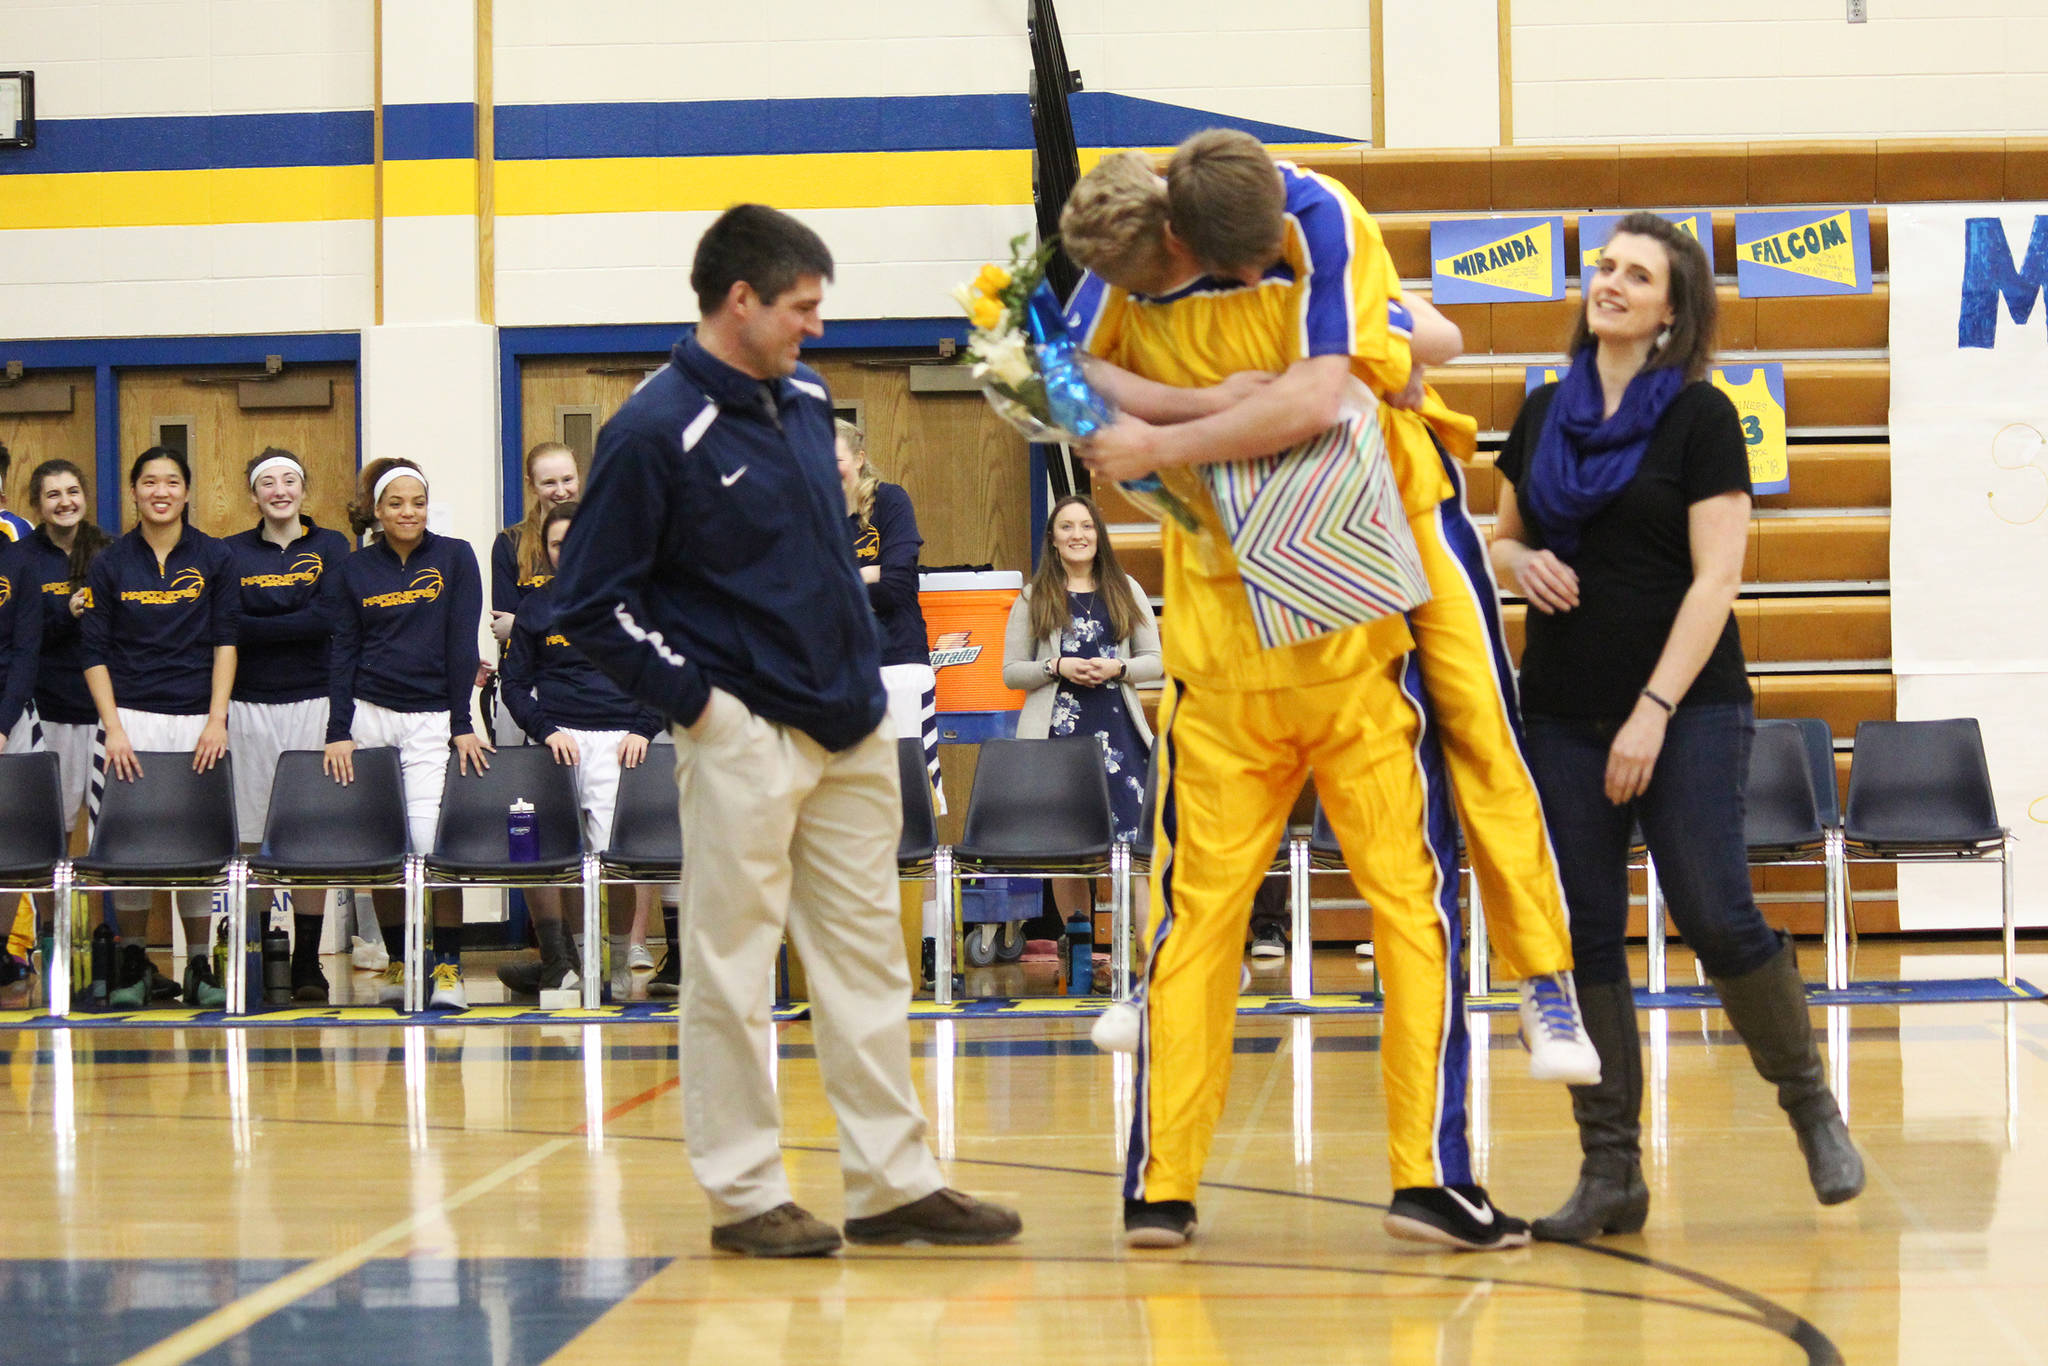 Homer’s Japheth McGhee picks up senior Joel Carroll in a big hug while presenting him with flowers and a gift during a Senior Night celebration before their basketball game against Seward High School on Friday, March 2, 2018 in Homer, Alaska. (Photo by Megan Pacer/Homer News)